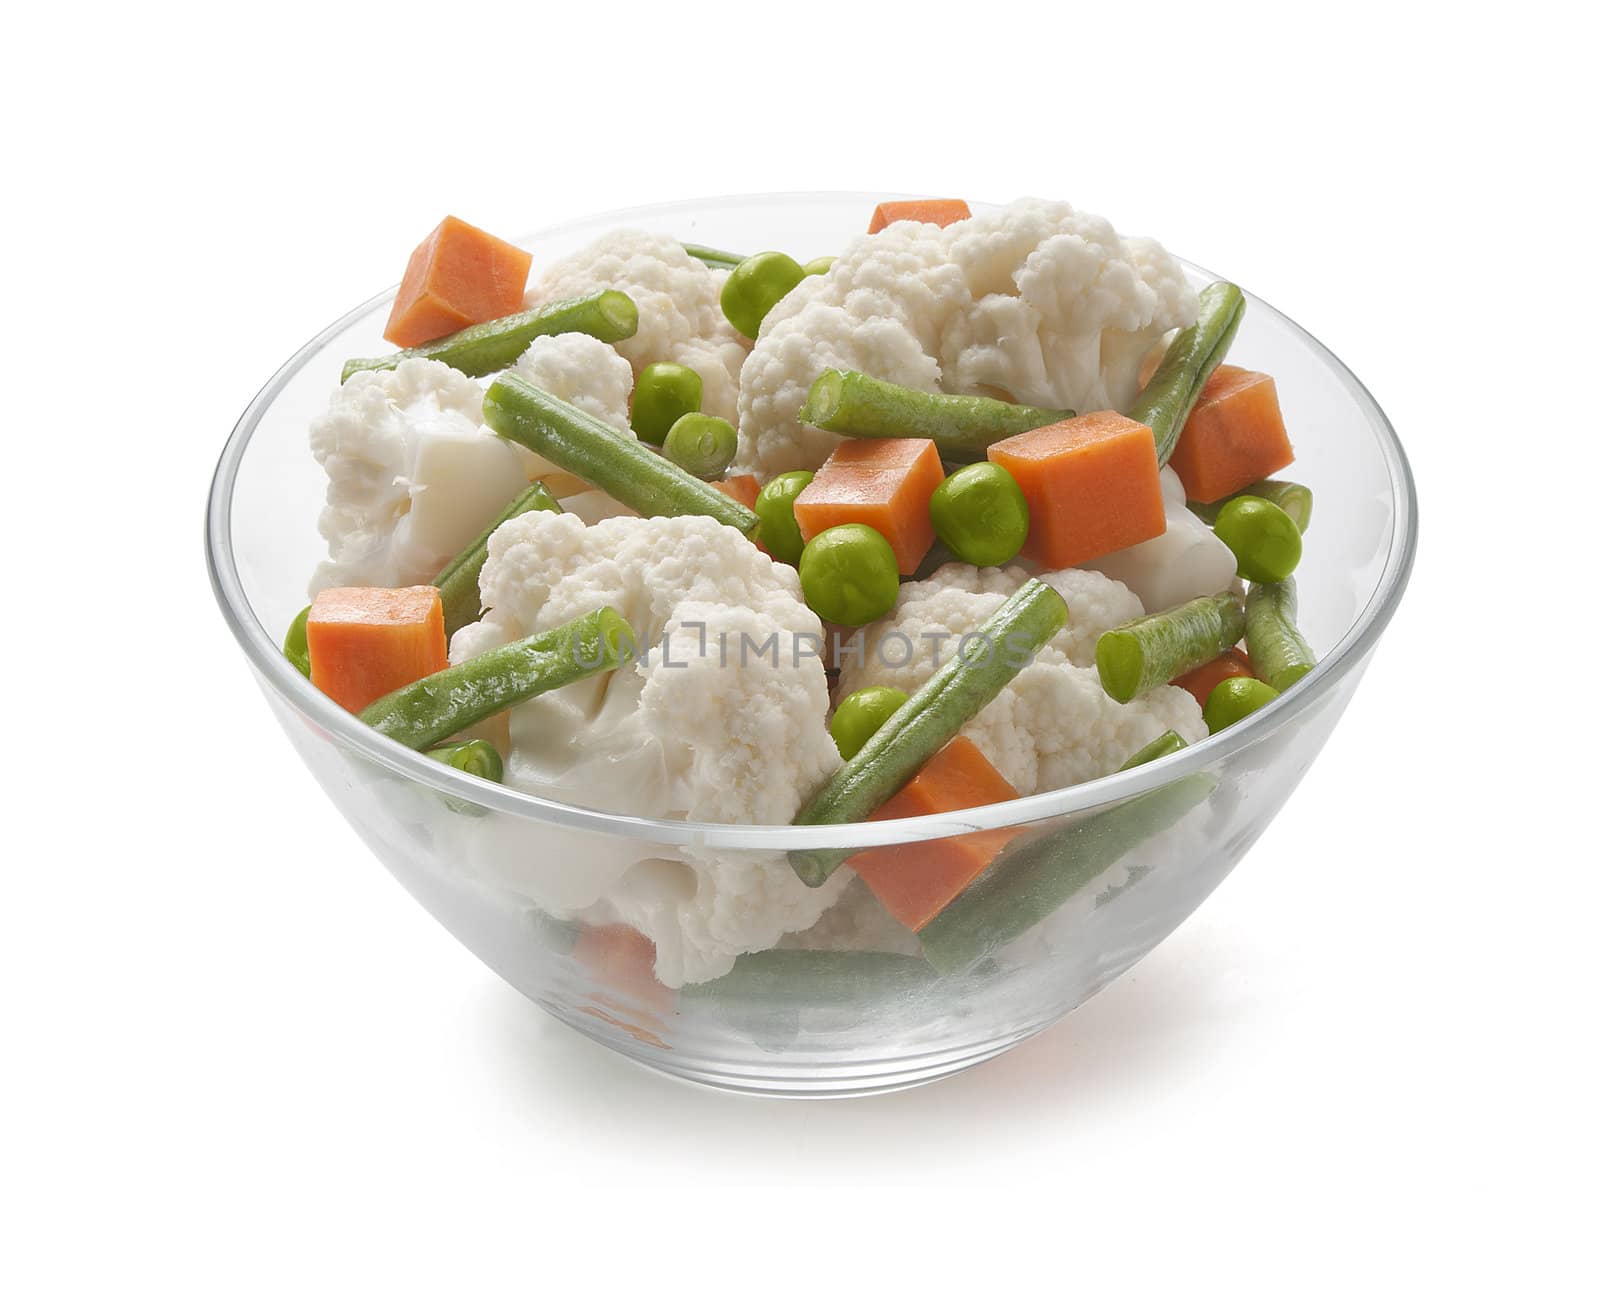 Vegetable mix with cauliflower, carrot, peas and kidney bean in glass bowl